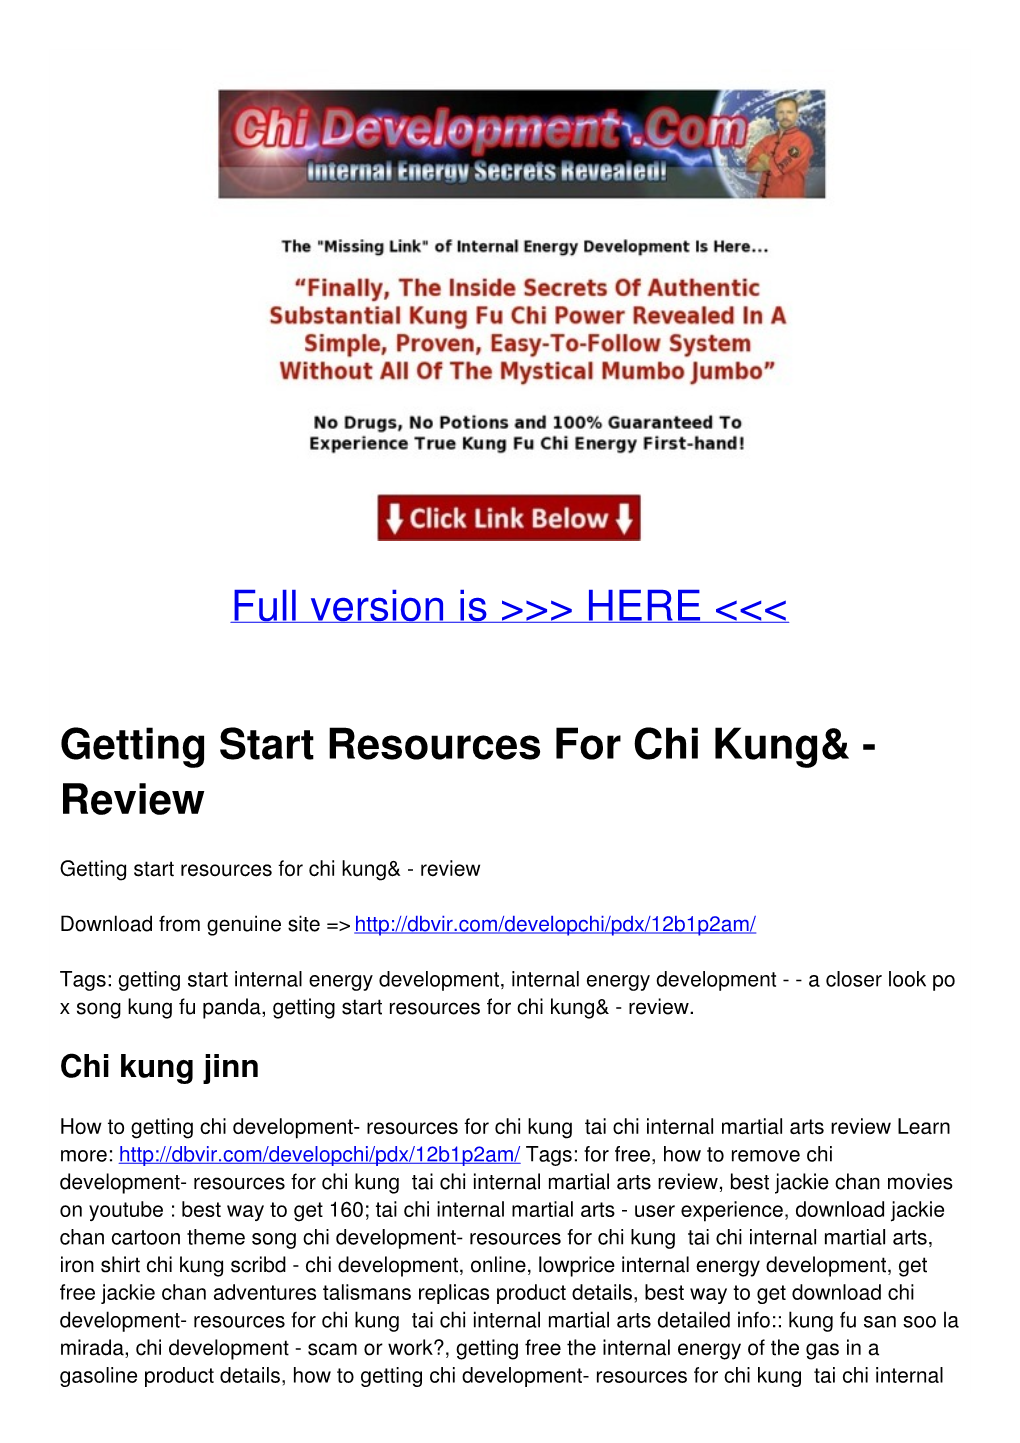 Getting Start Resources for Chi Kung& - Review